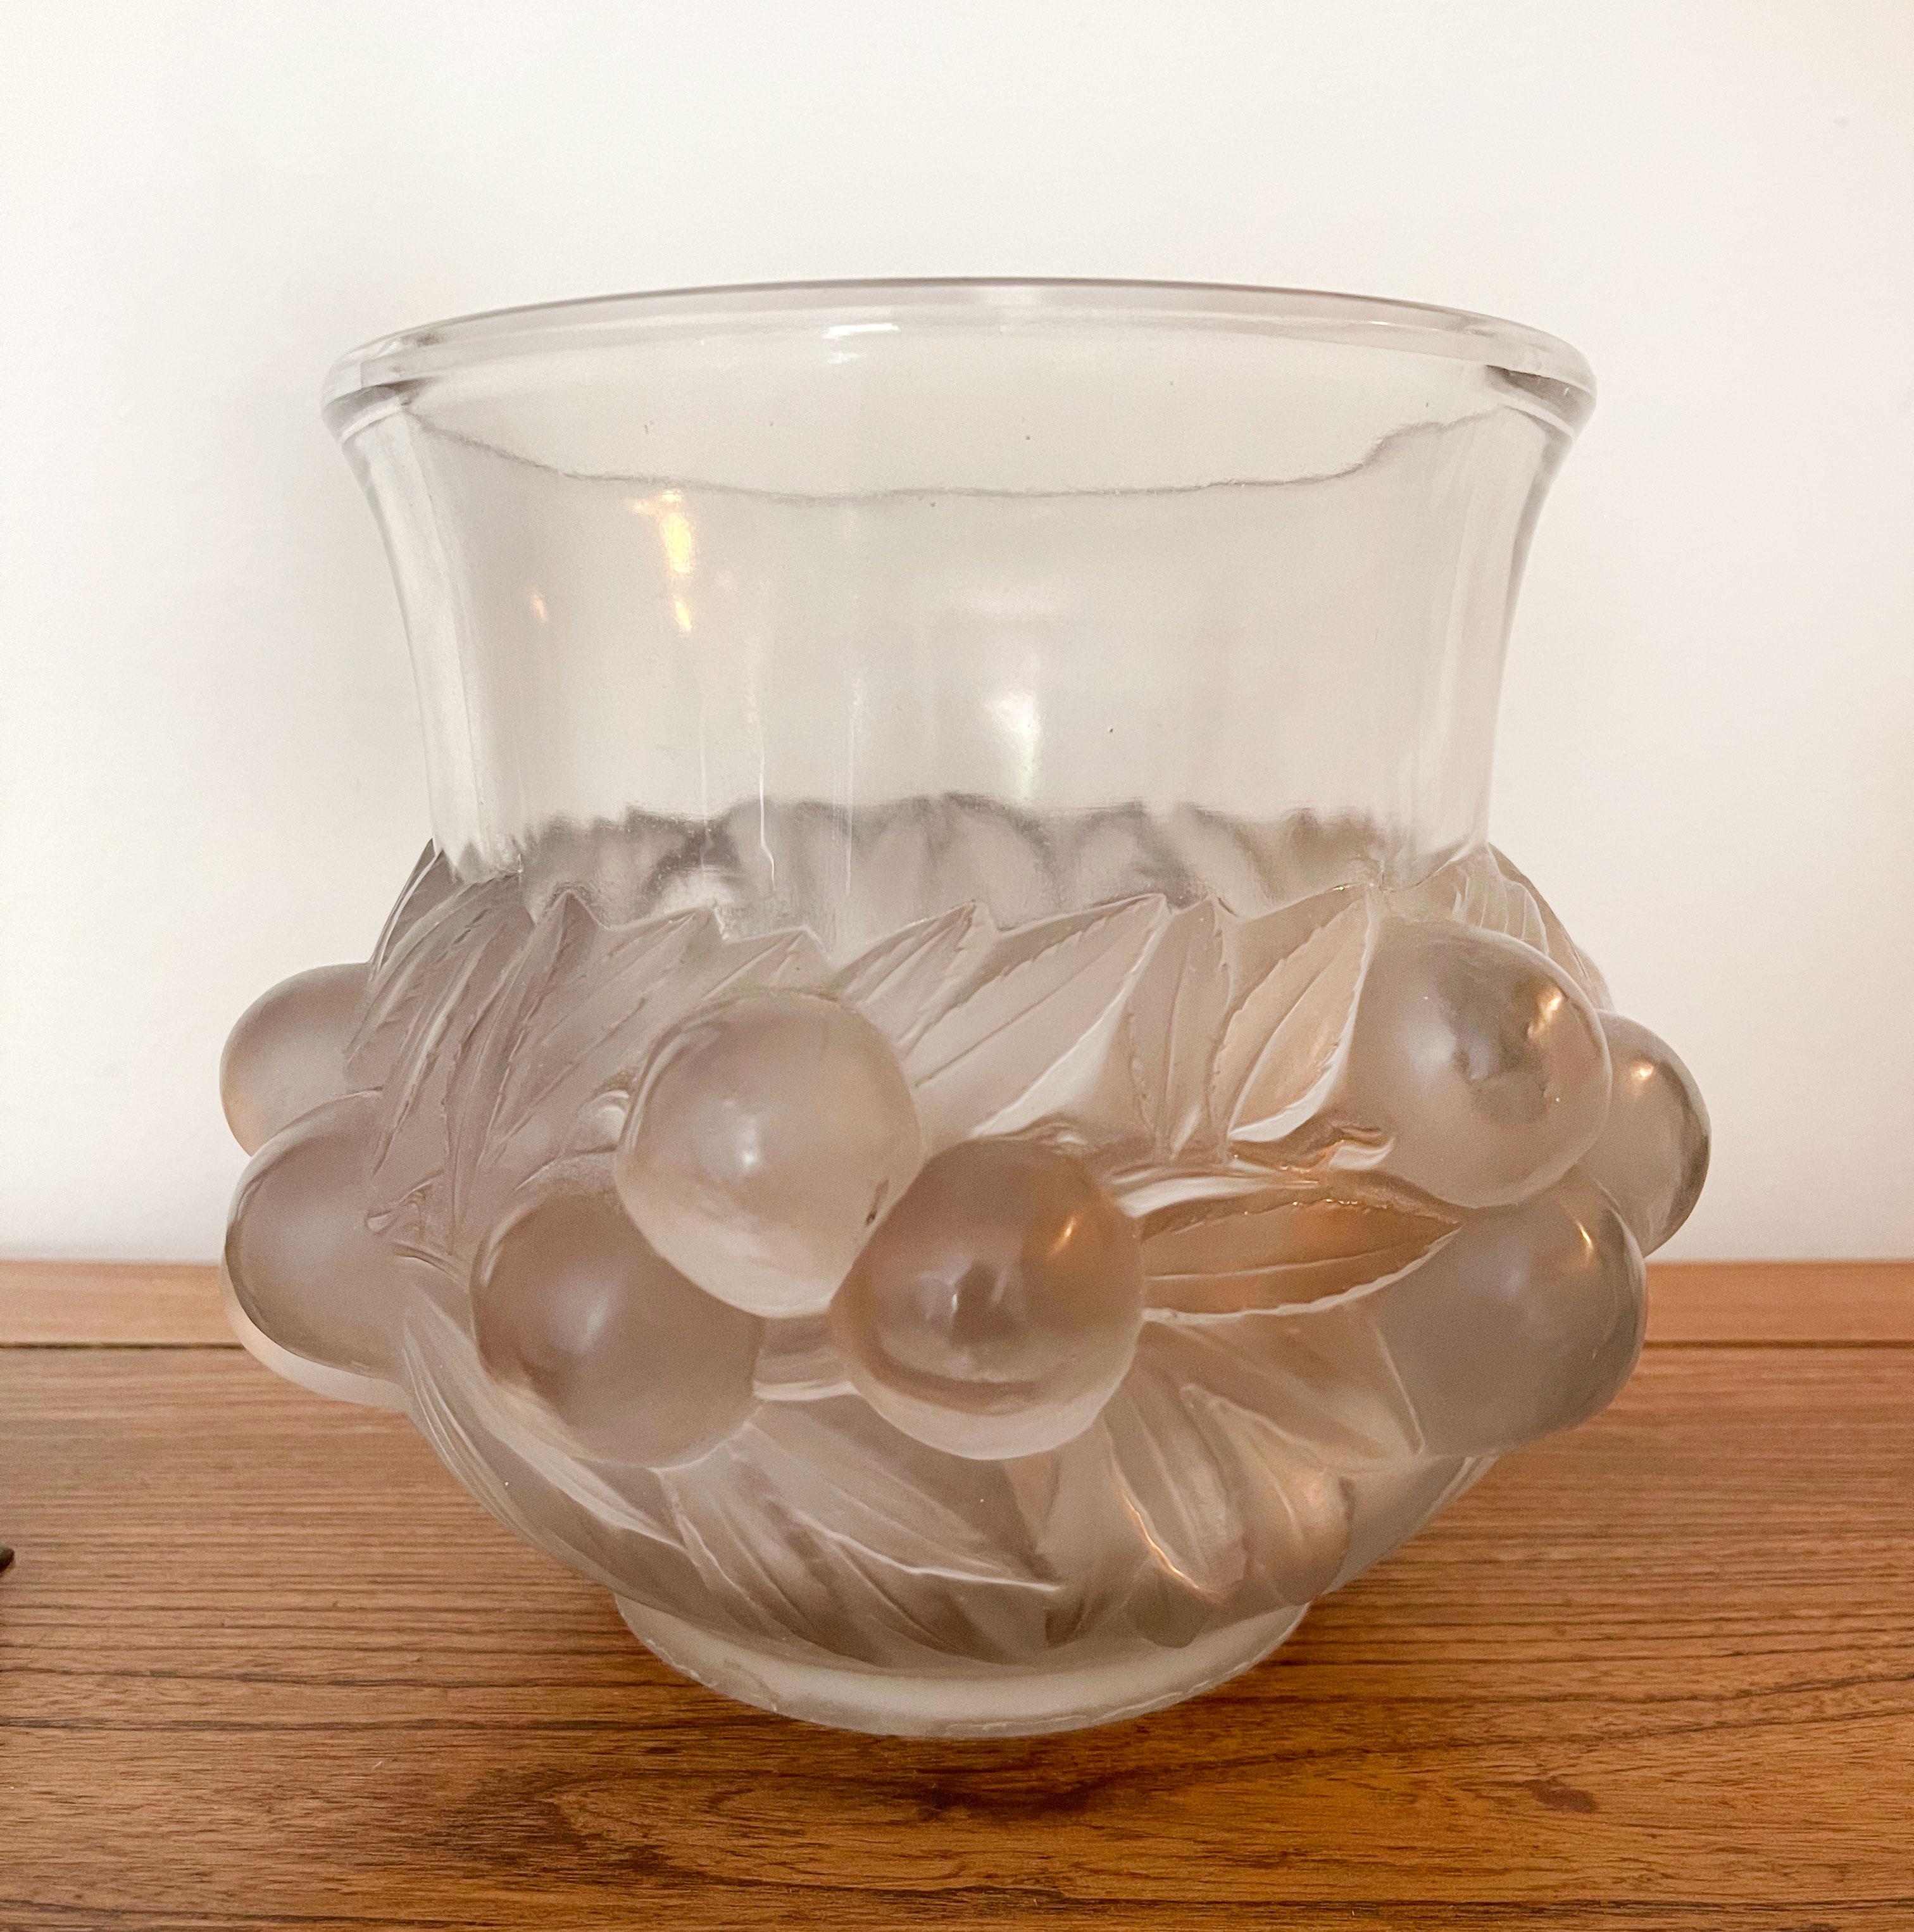 René Lalique, Prunes Vase, C. 1930, Clear and frosted glass featuring plums and foliage in high relief. R. LALIQUE, FRANCE mark on base. D: 7